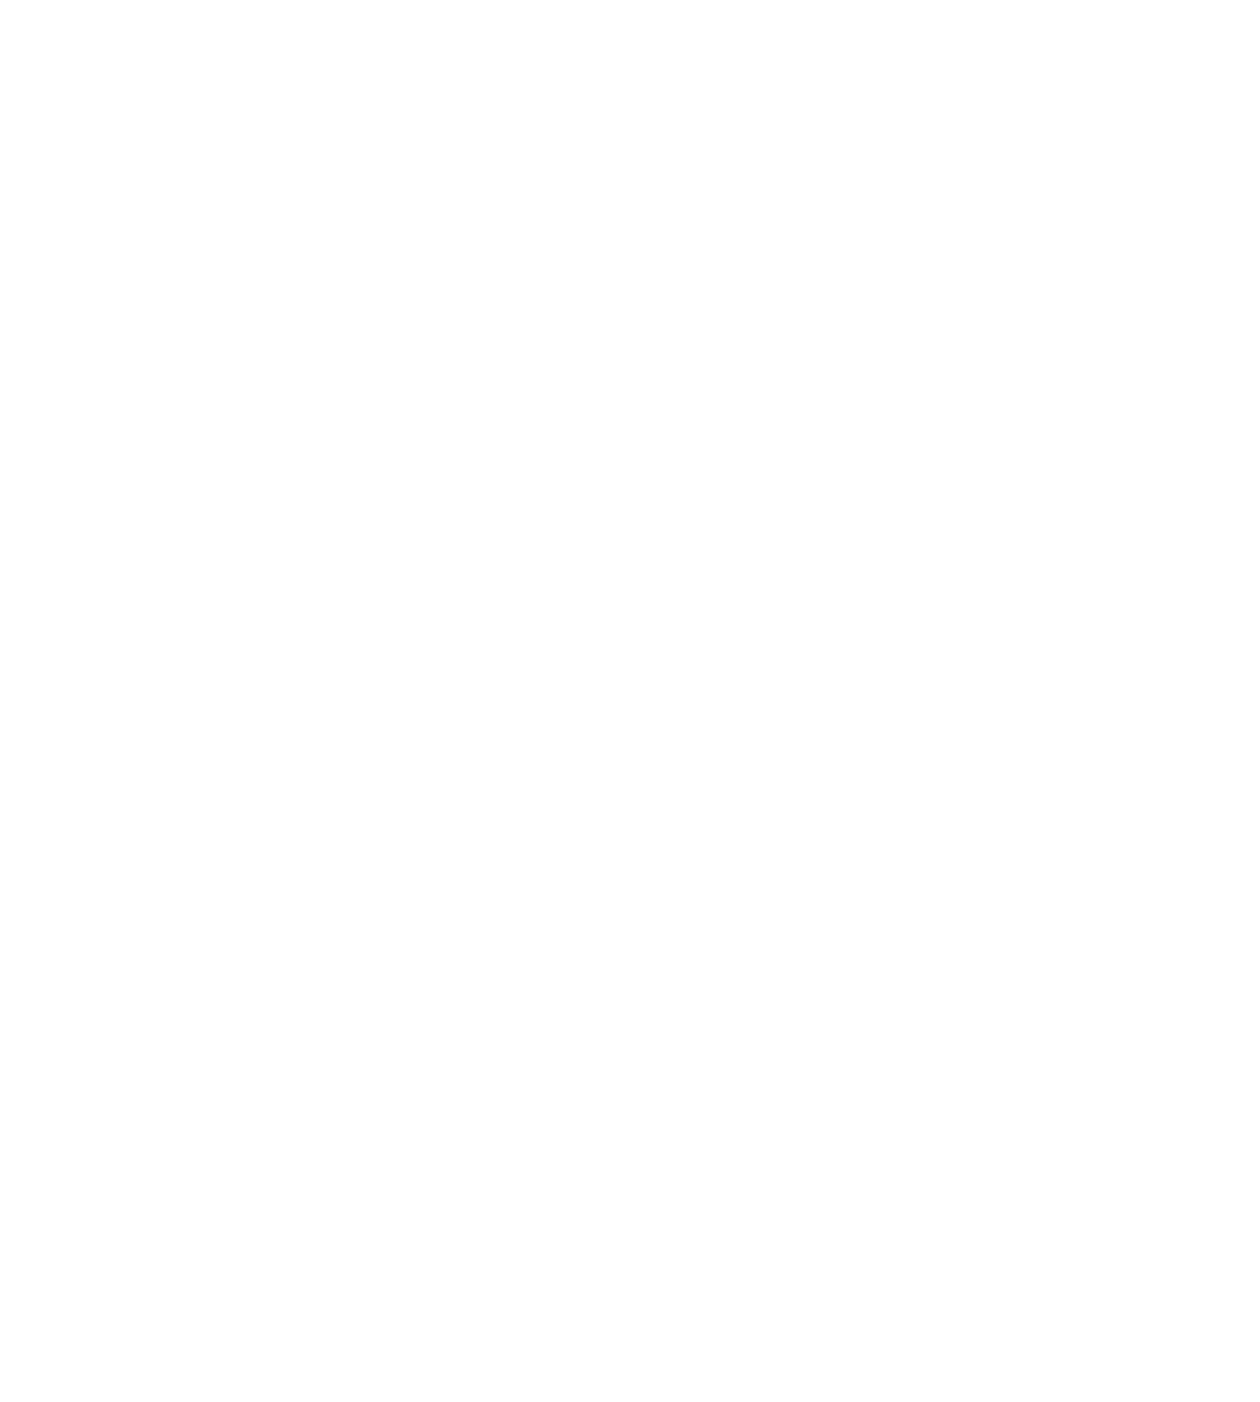 attract bees logo png